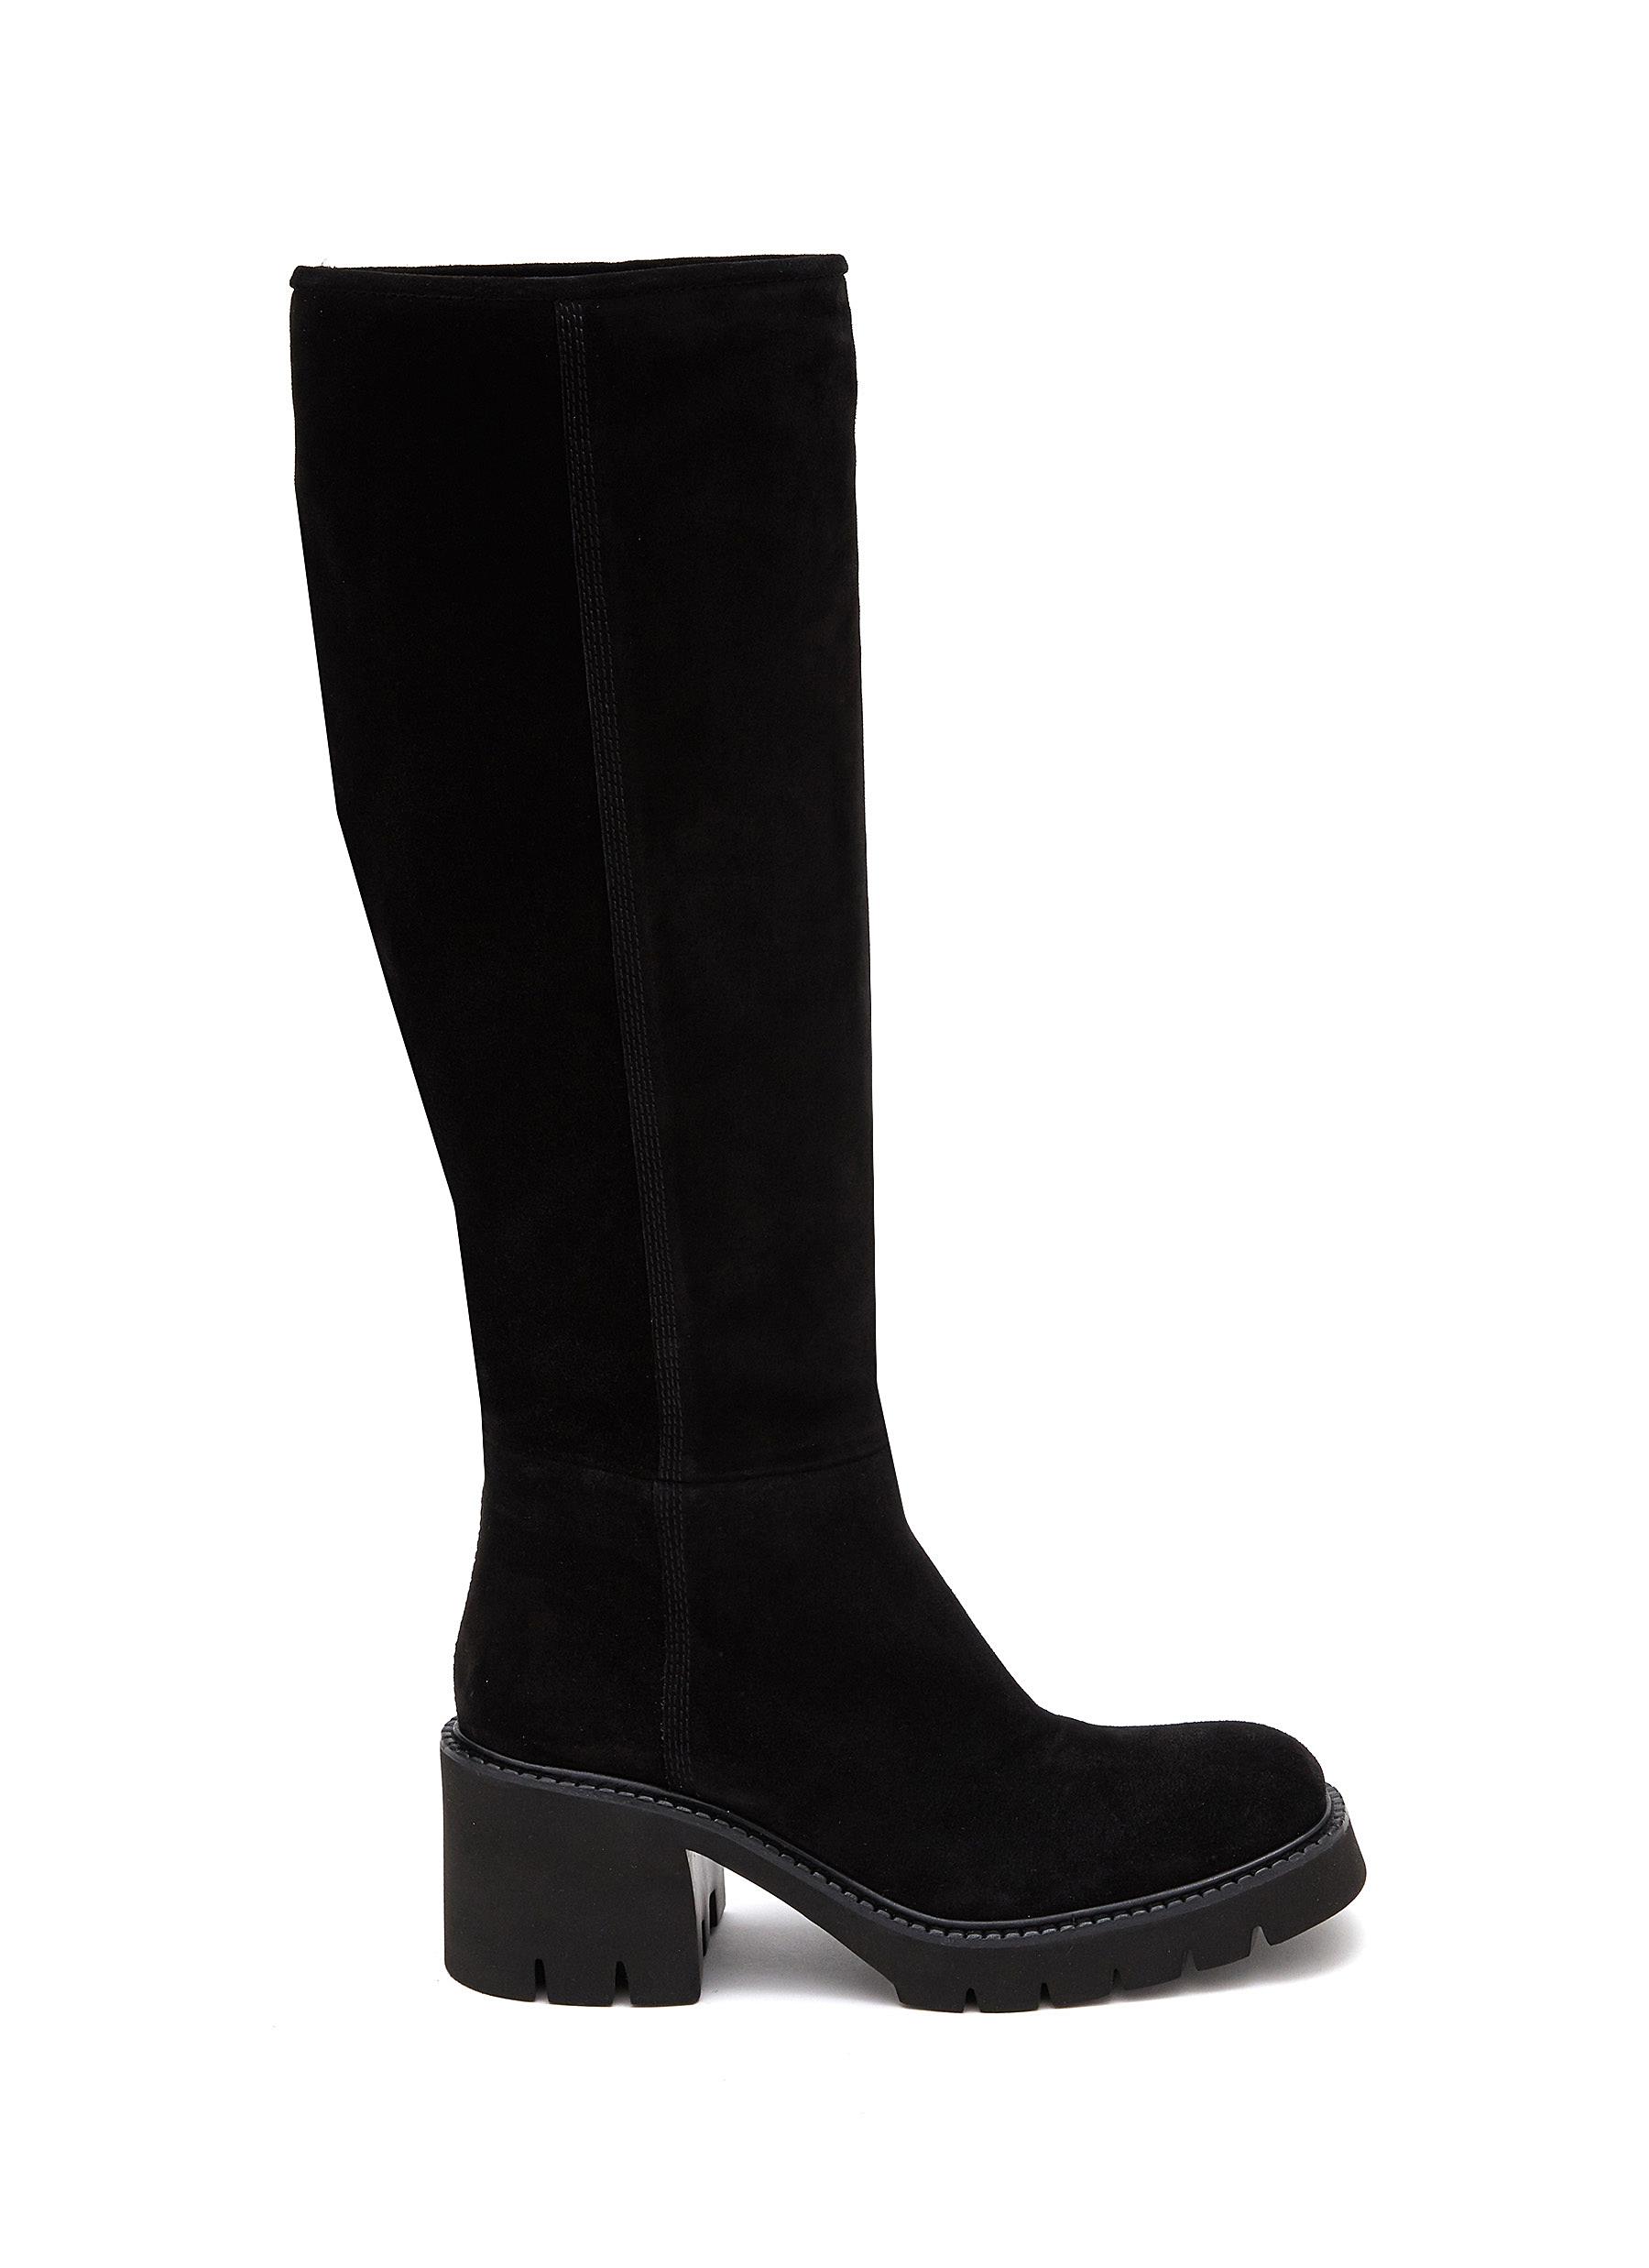 Zorion 70 Suede Knee-High Boots